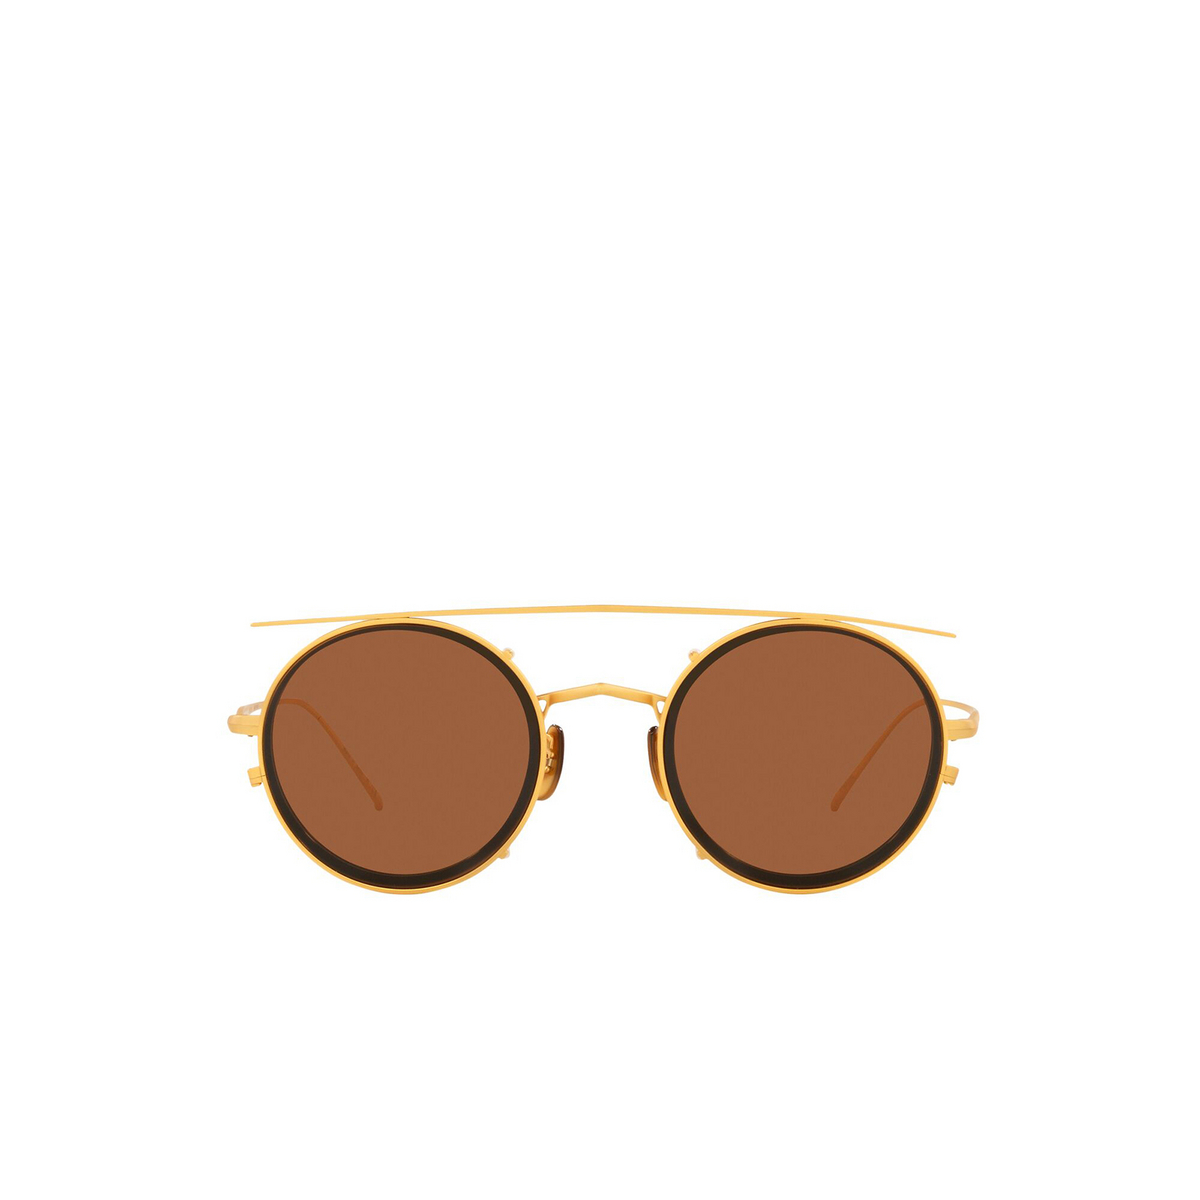 Oliver Peoples G. PONTI-2 Sunglasses 5414 Brushed Brass - front view